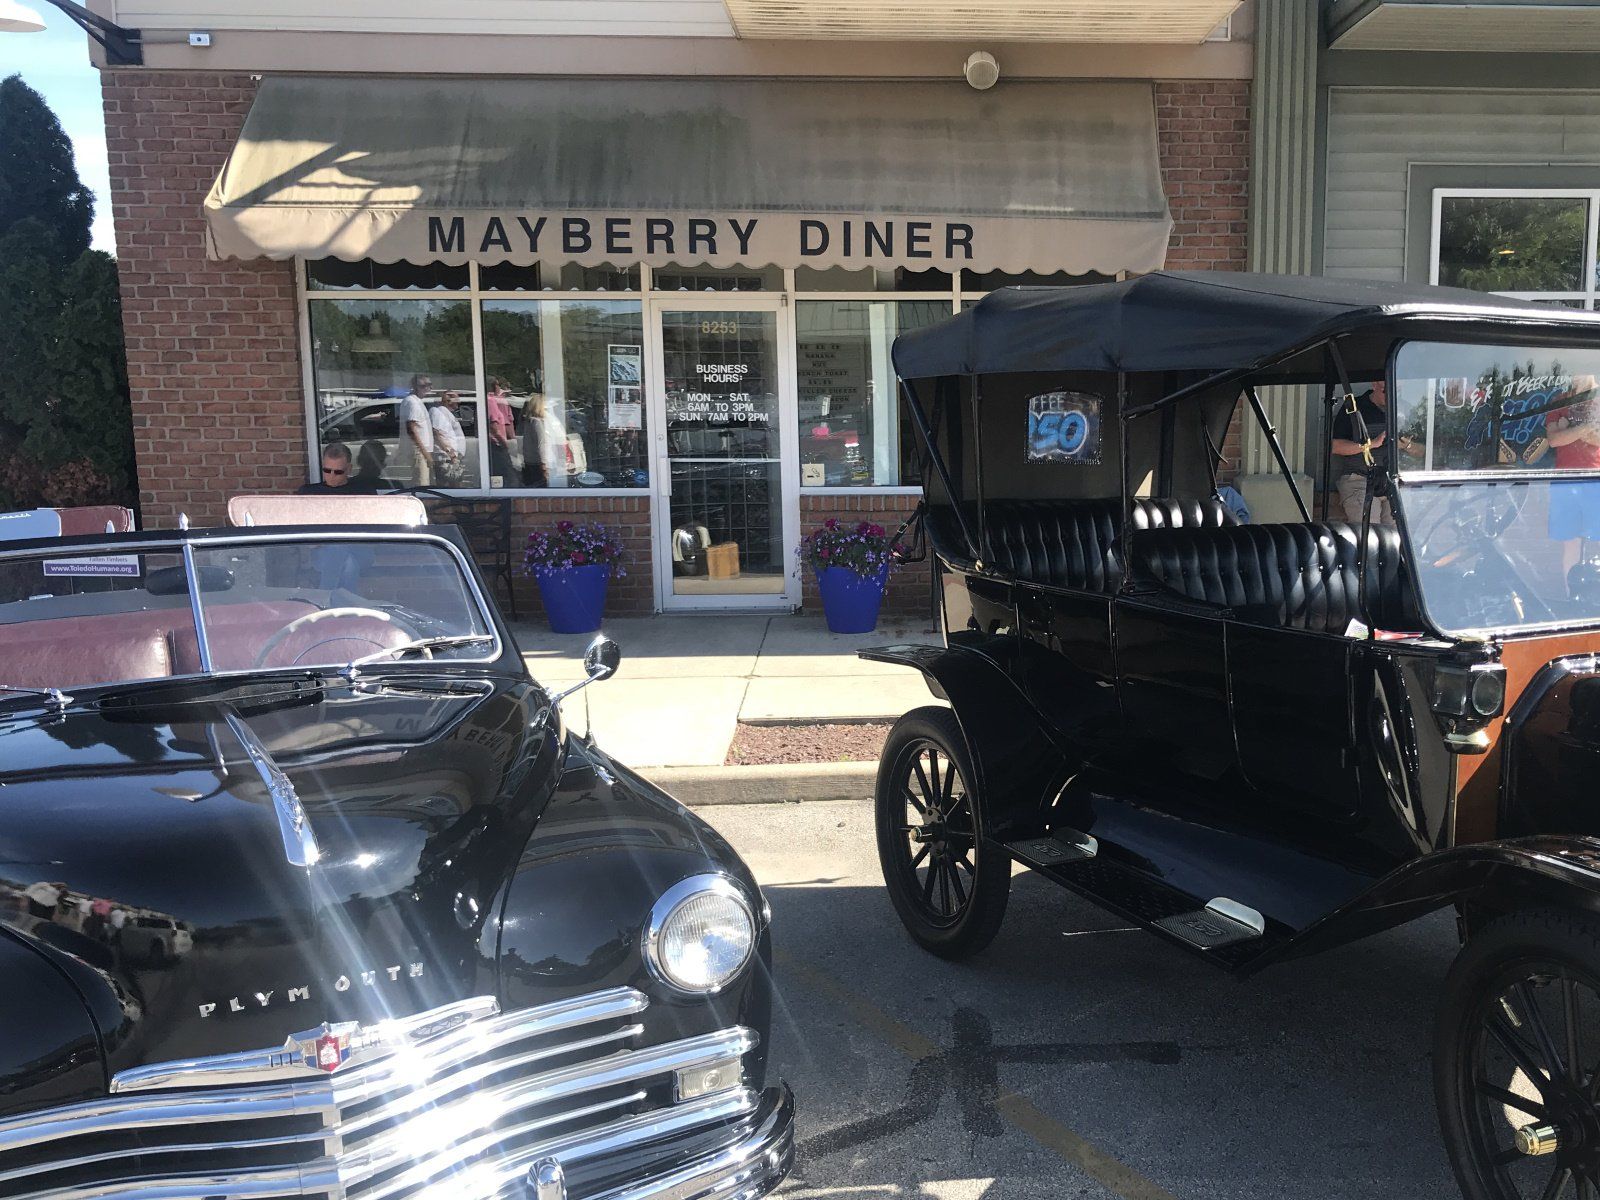 Mayberry Diner - Outside Building Image - Mayberry Square S, Sylvania, Ohio Location